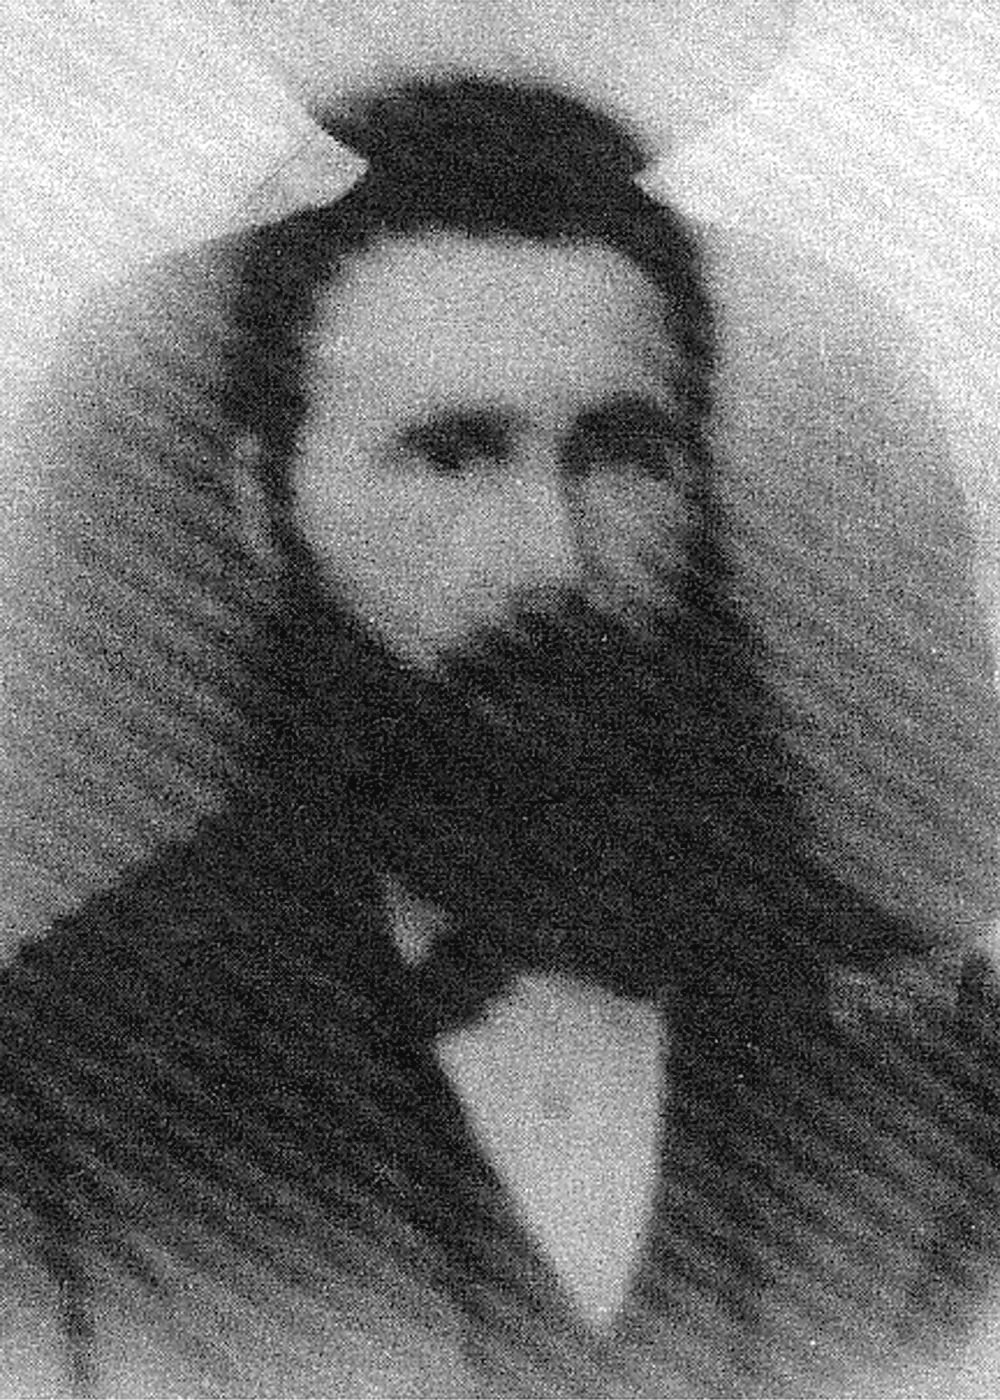 Jón Evyindsson was a missionary companion to Jakob  B. Jónsson. They served for a short time in Canada before  continuing to their mission in Iceland from 1879 to 1881.  Courtesy of the Icelandic Association of Utah.